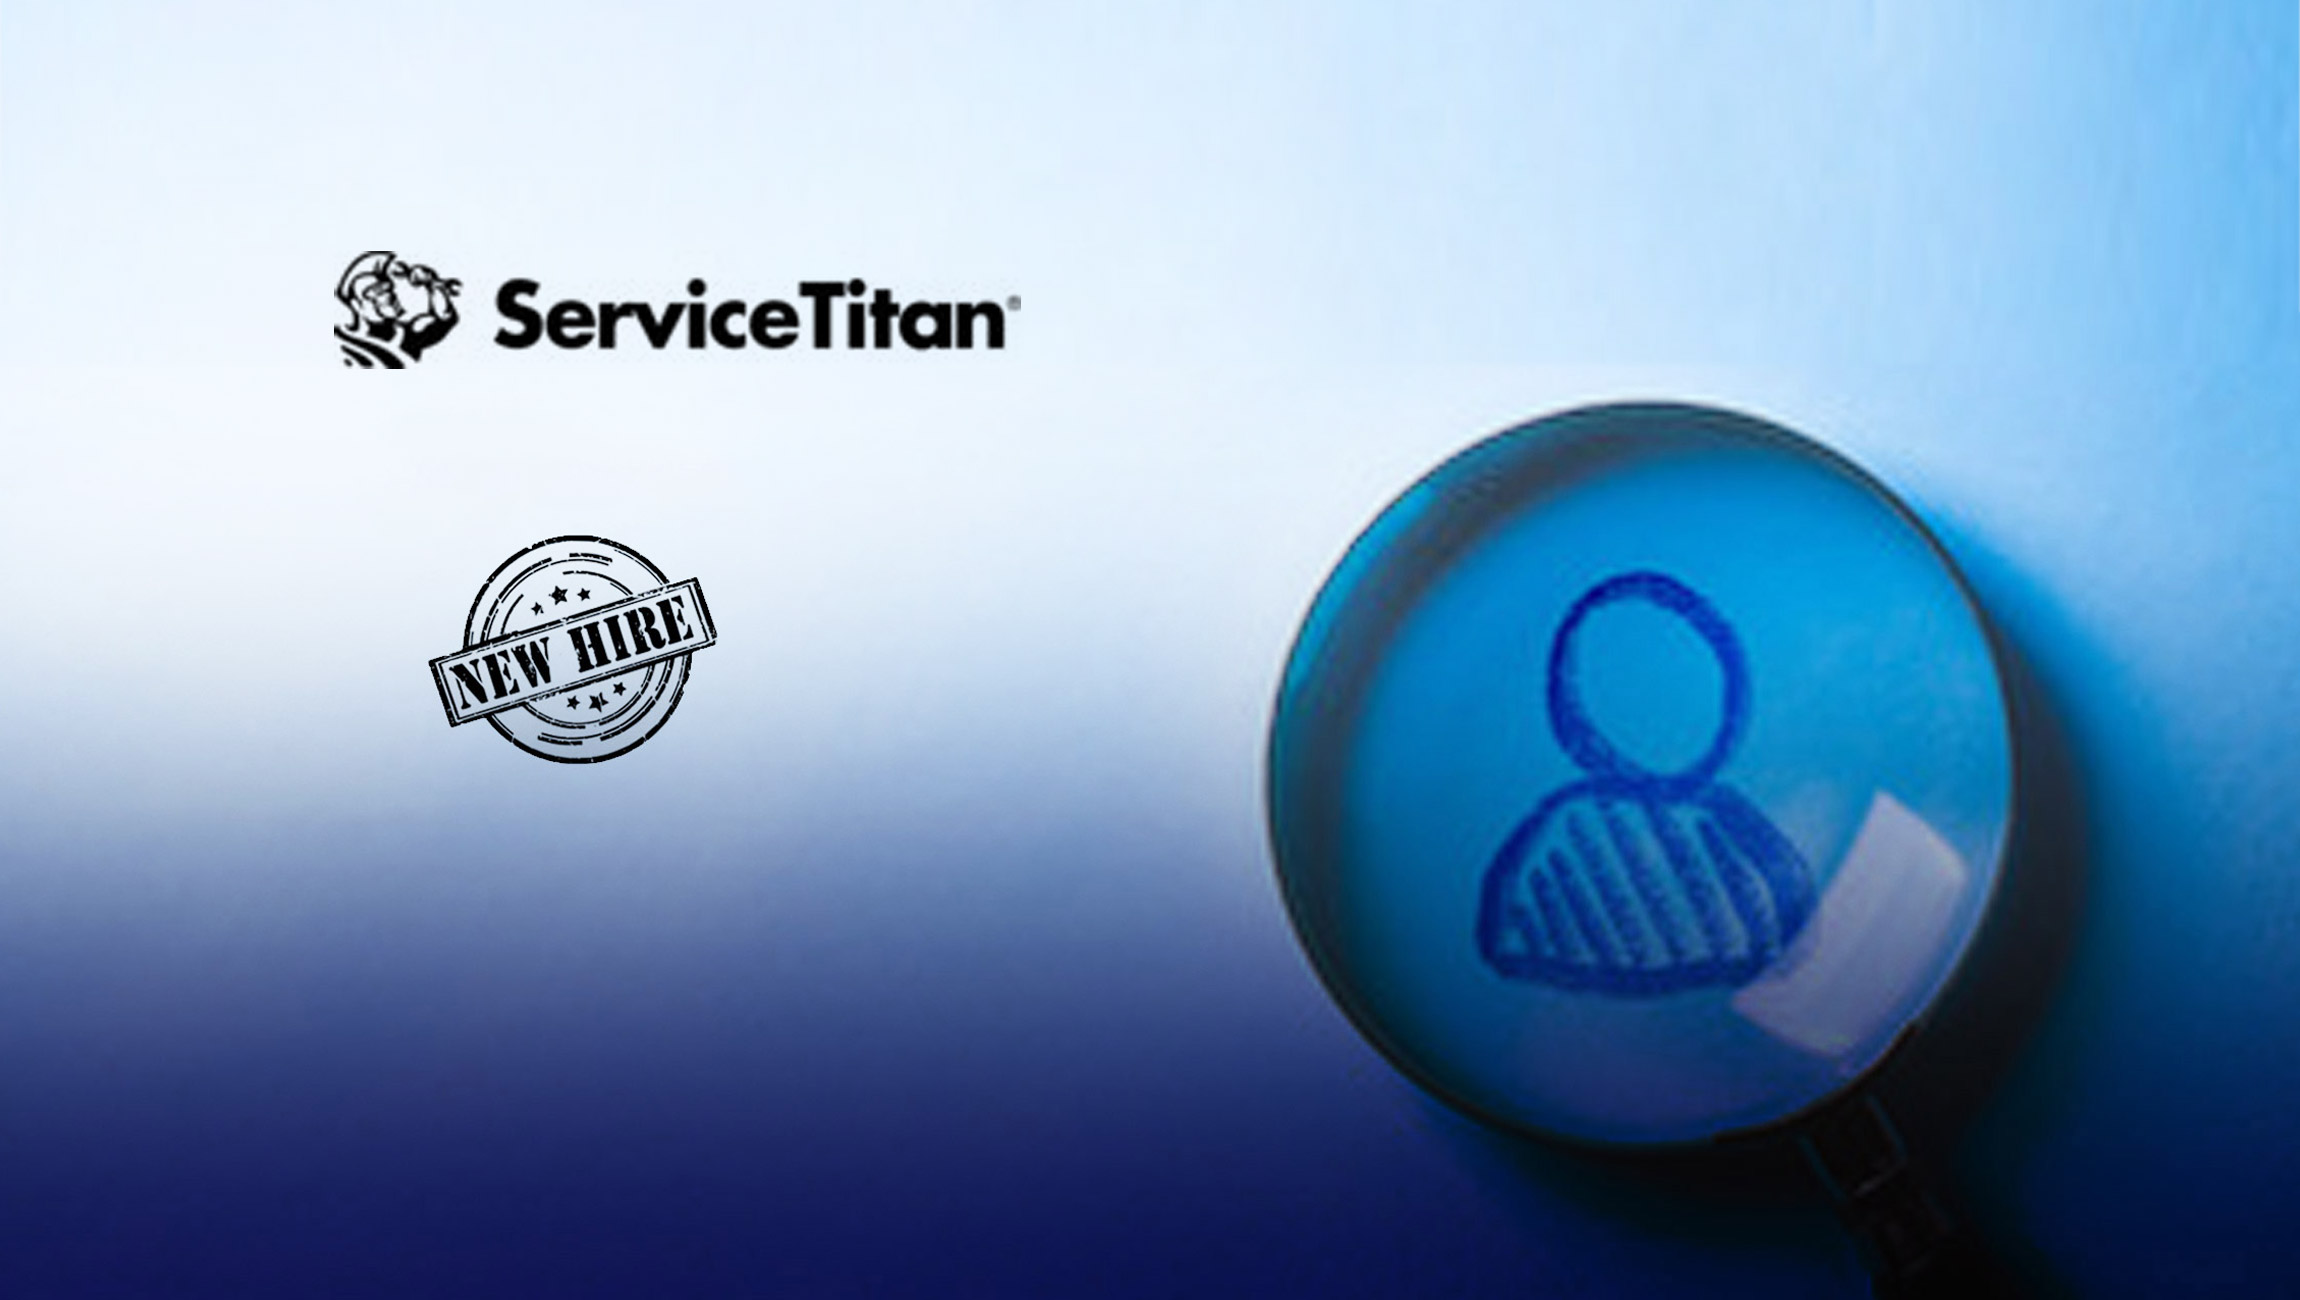 ServiceTitan Deepens its Executive Team, Appointing Olive Huang as General Counsel and Doug Myers as SVP of Operations